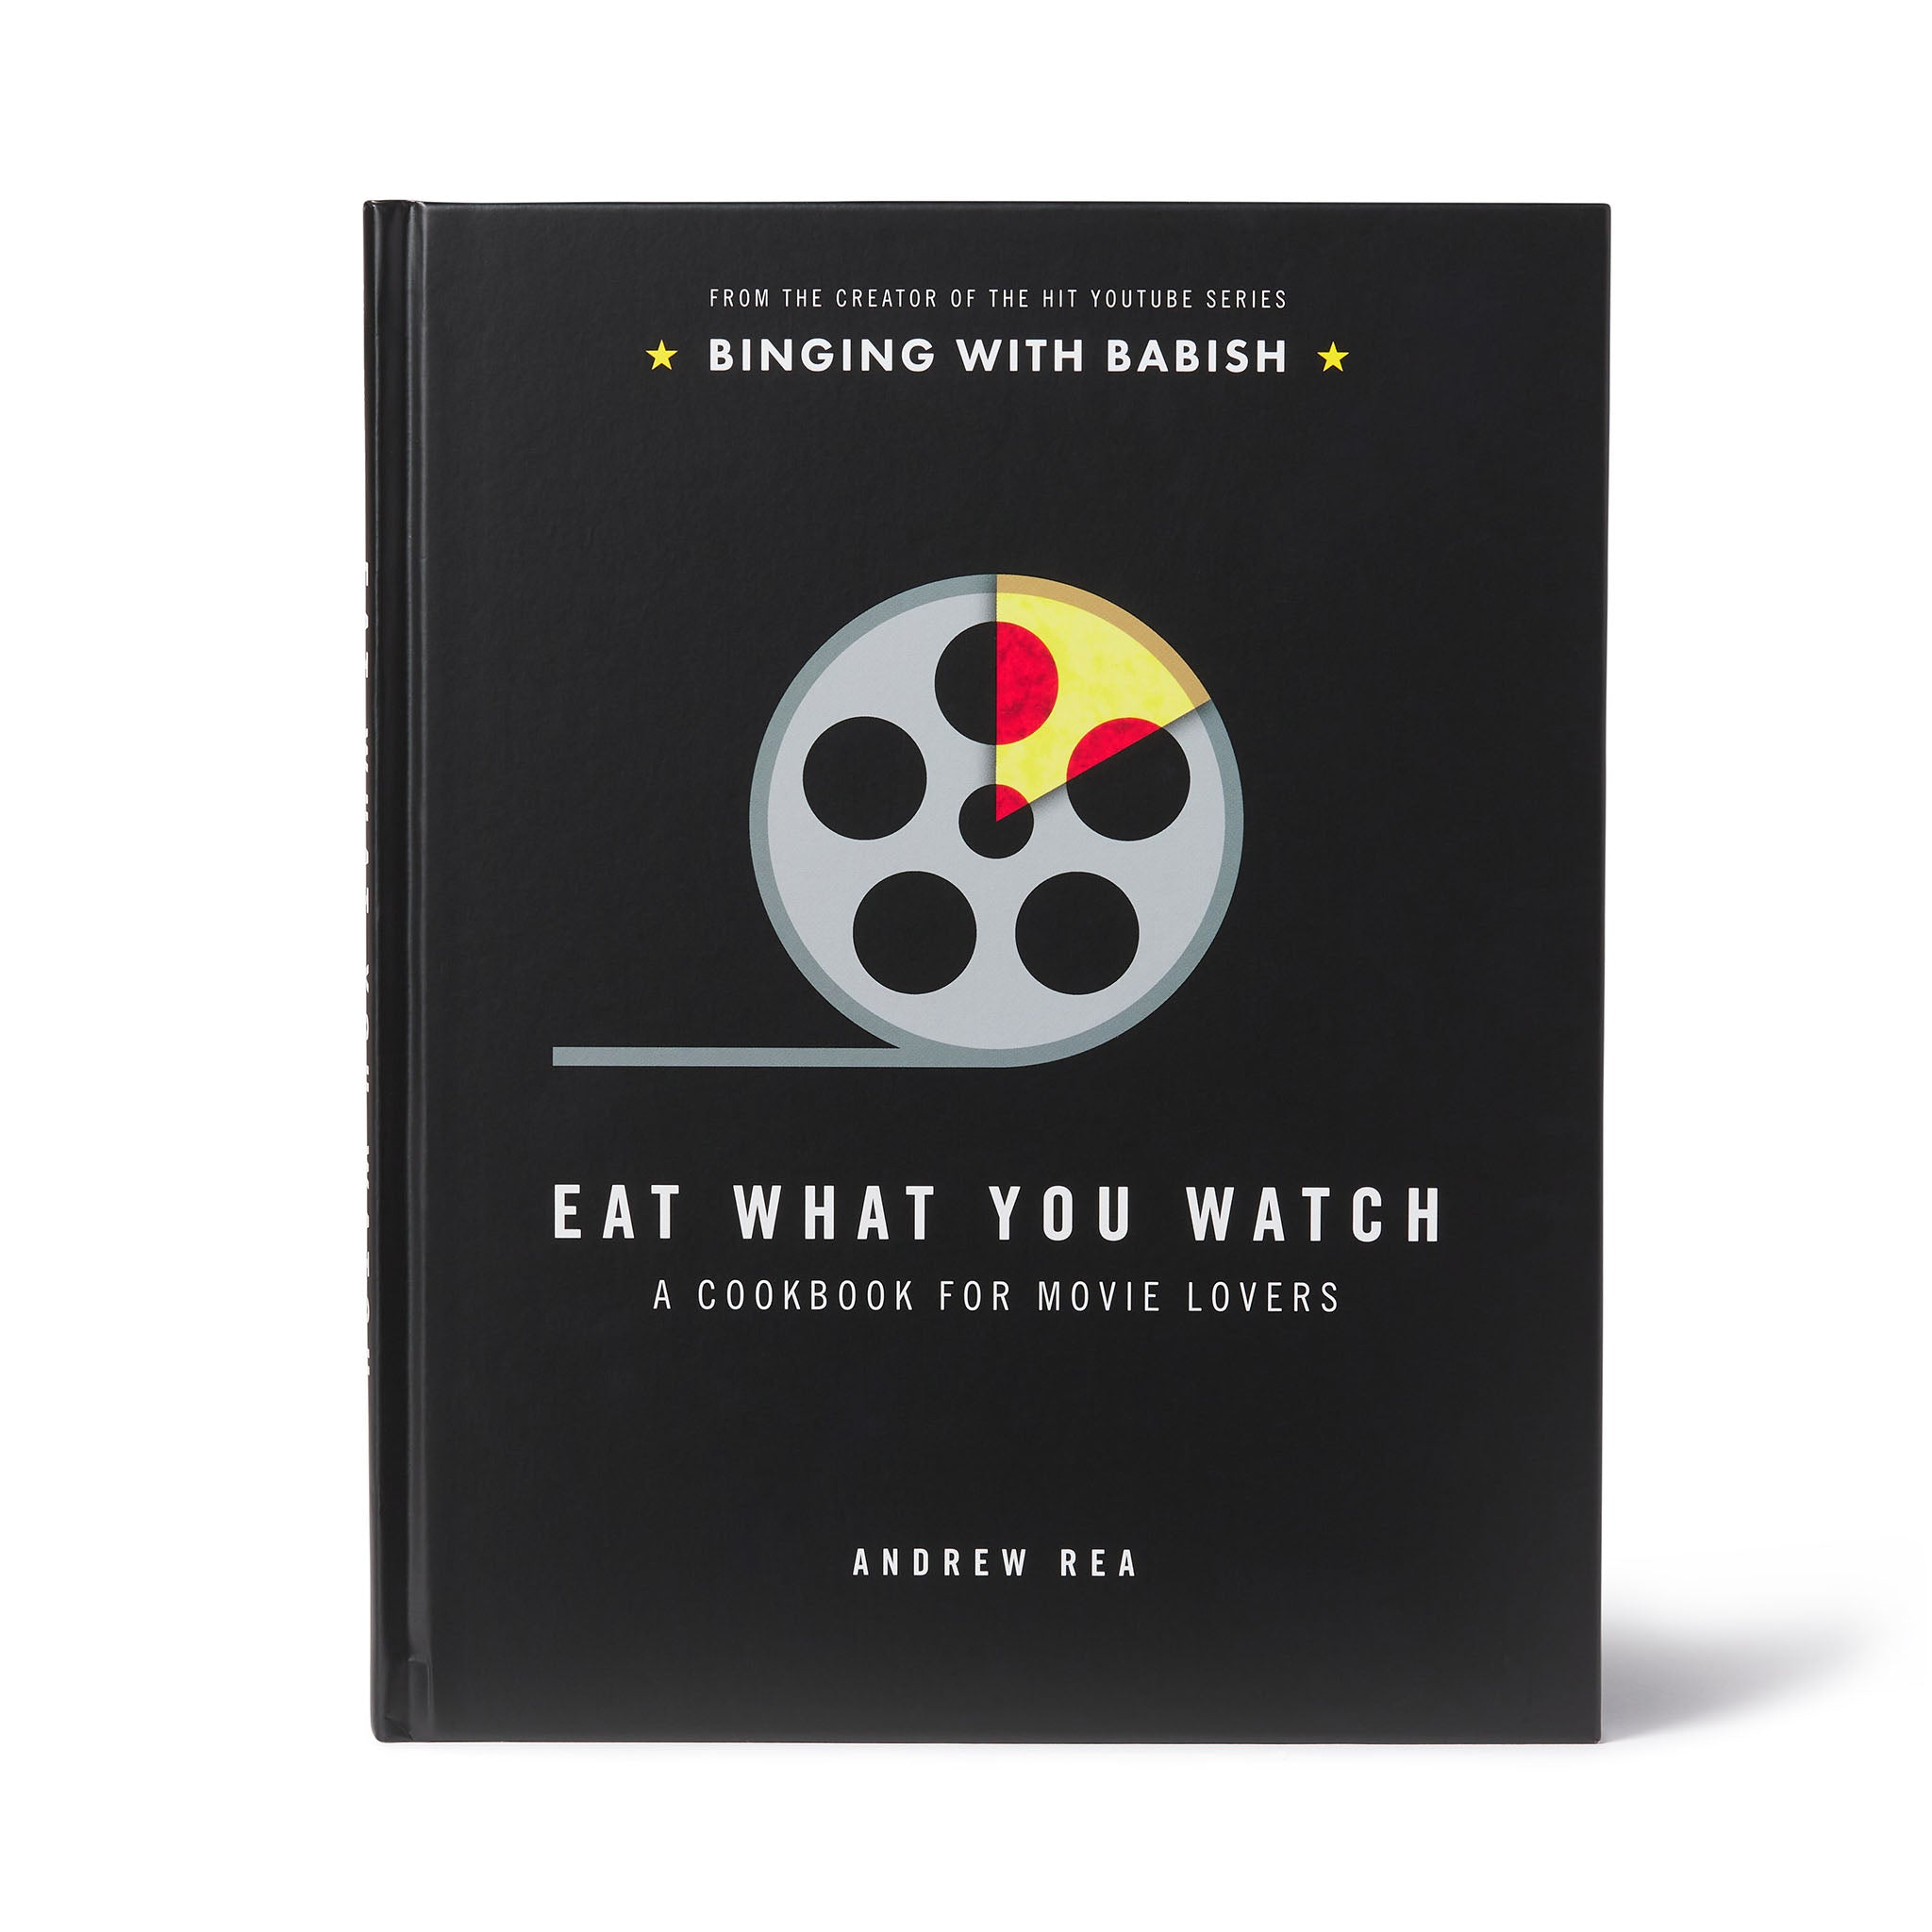 EAT WHAT YOU WATCH COOKBOOK